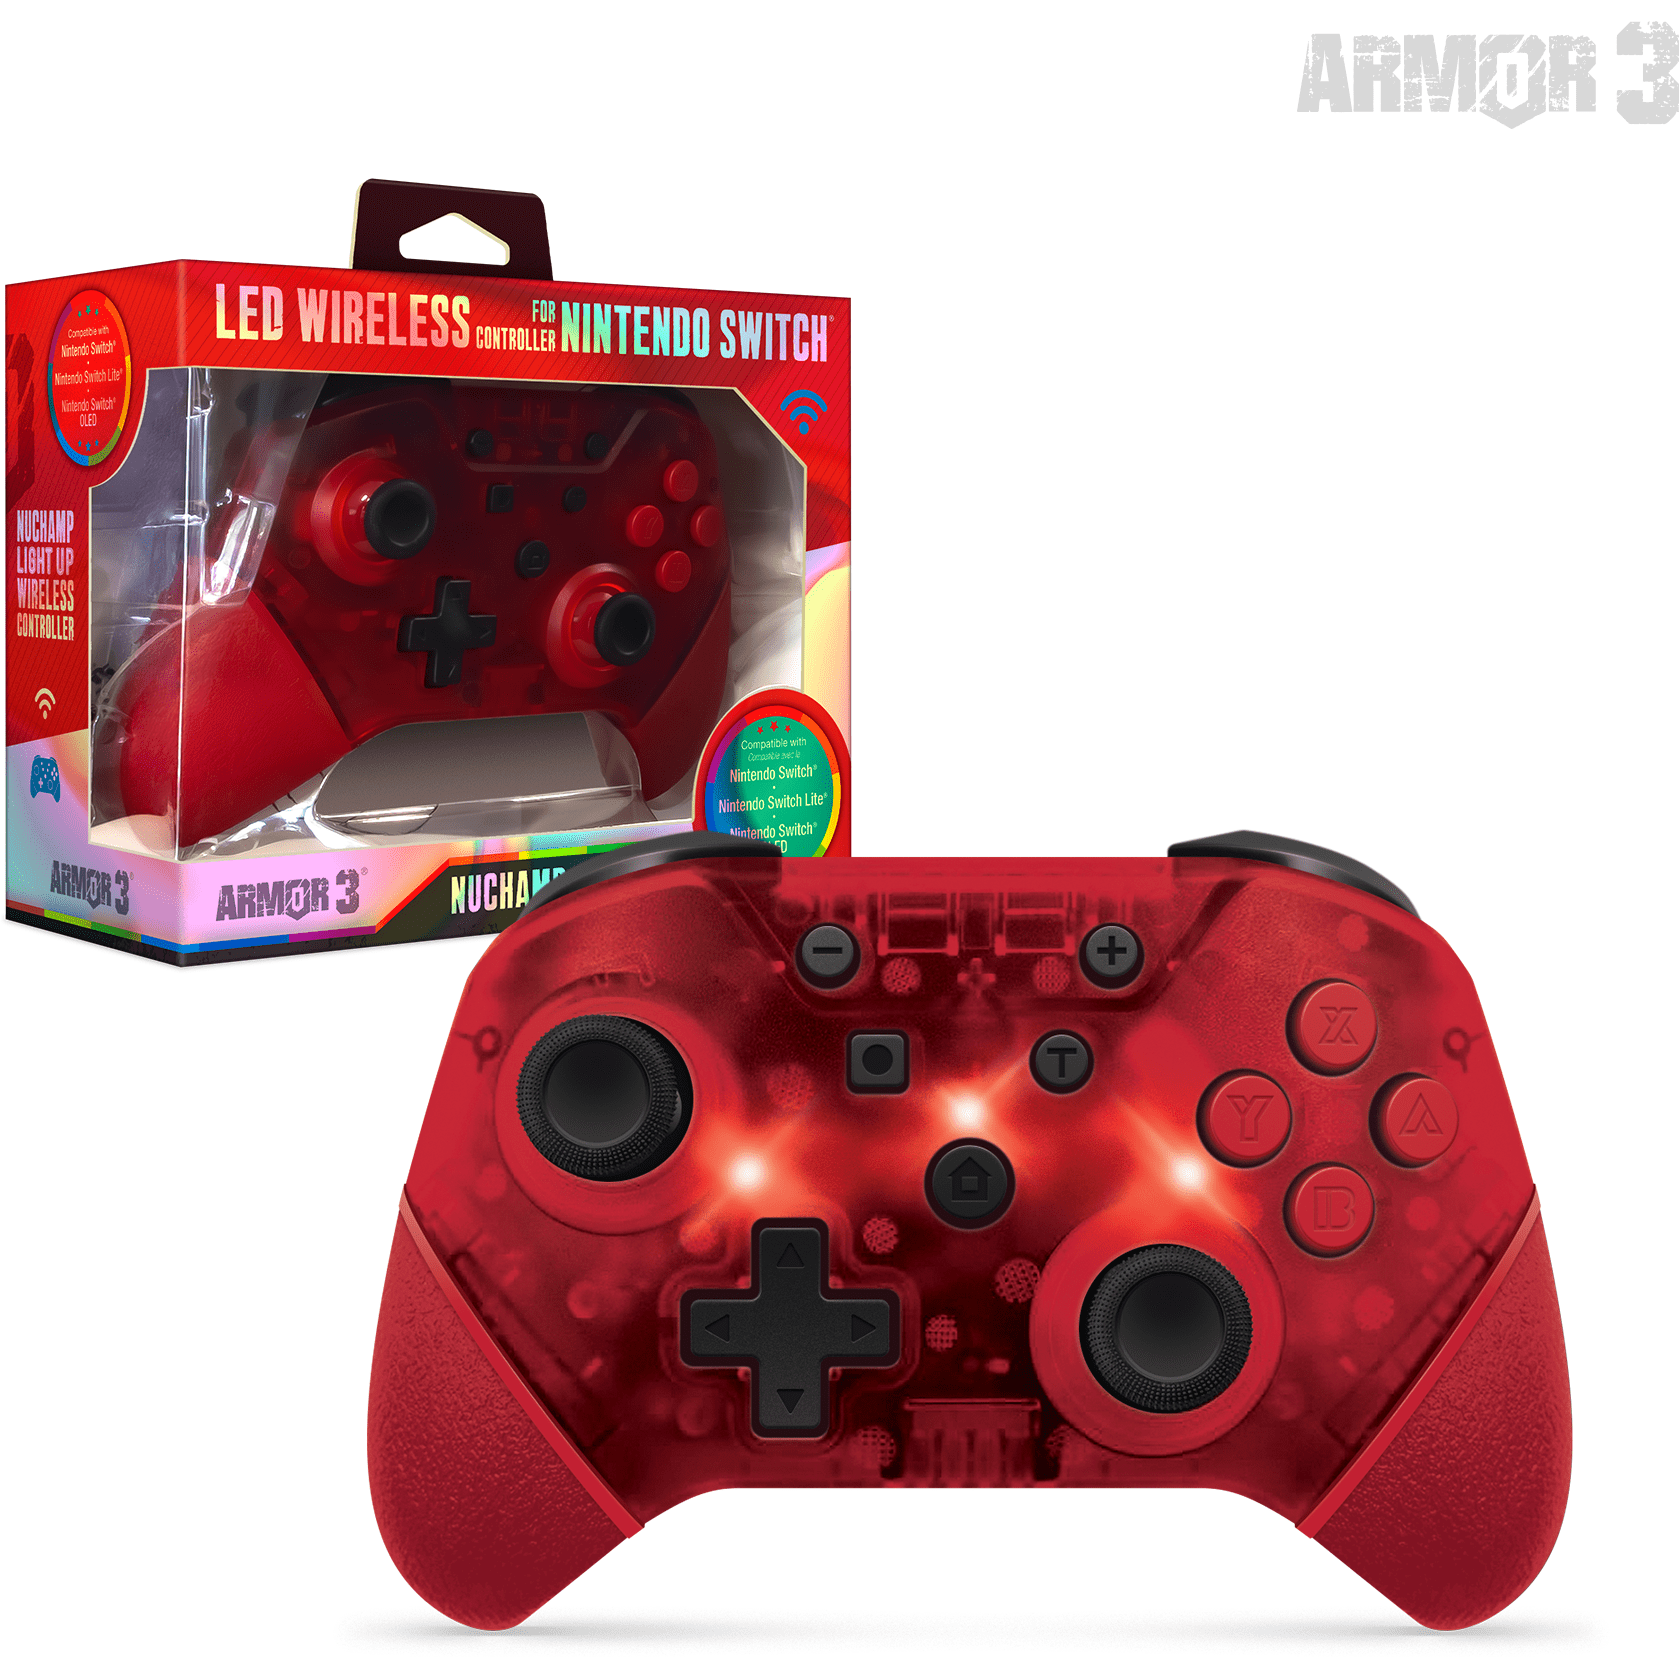 NuChamp Wireless Controller for Nintendo Switch (Red)